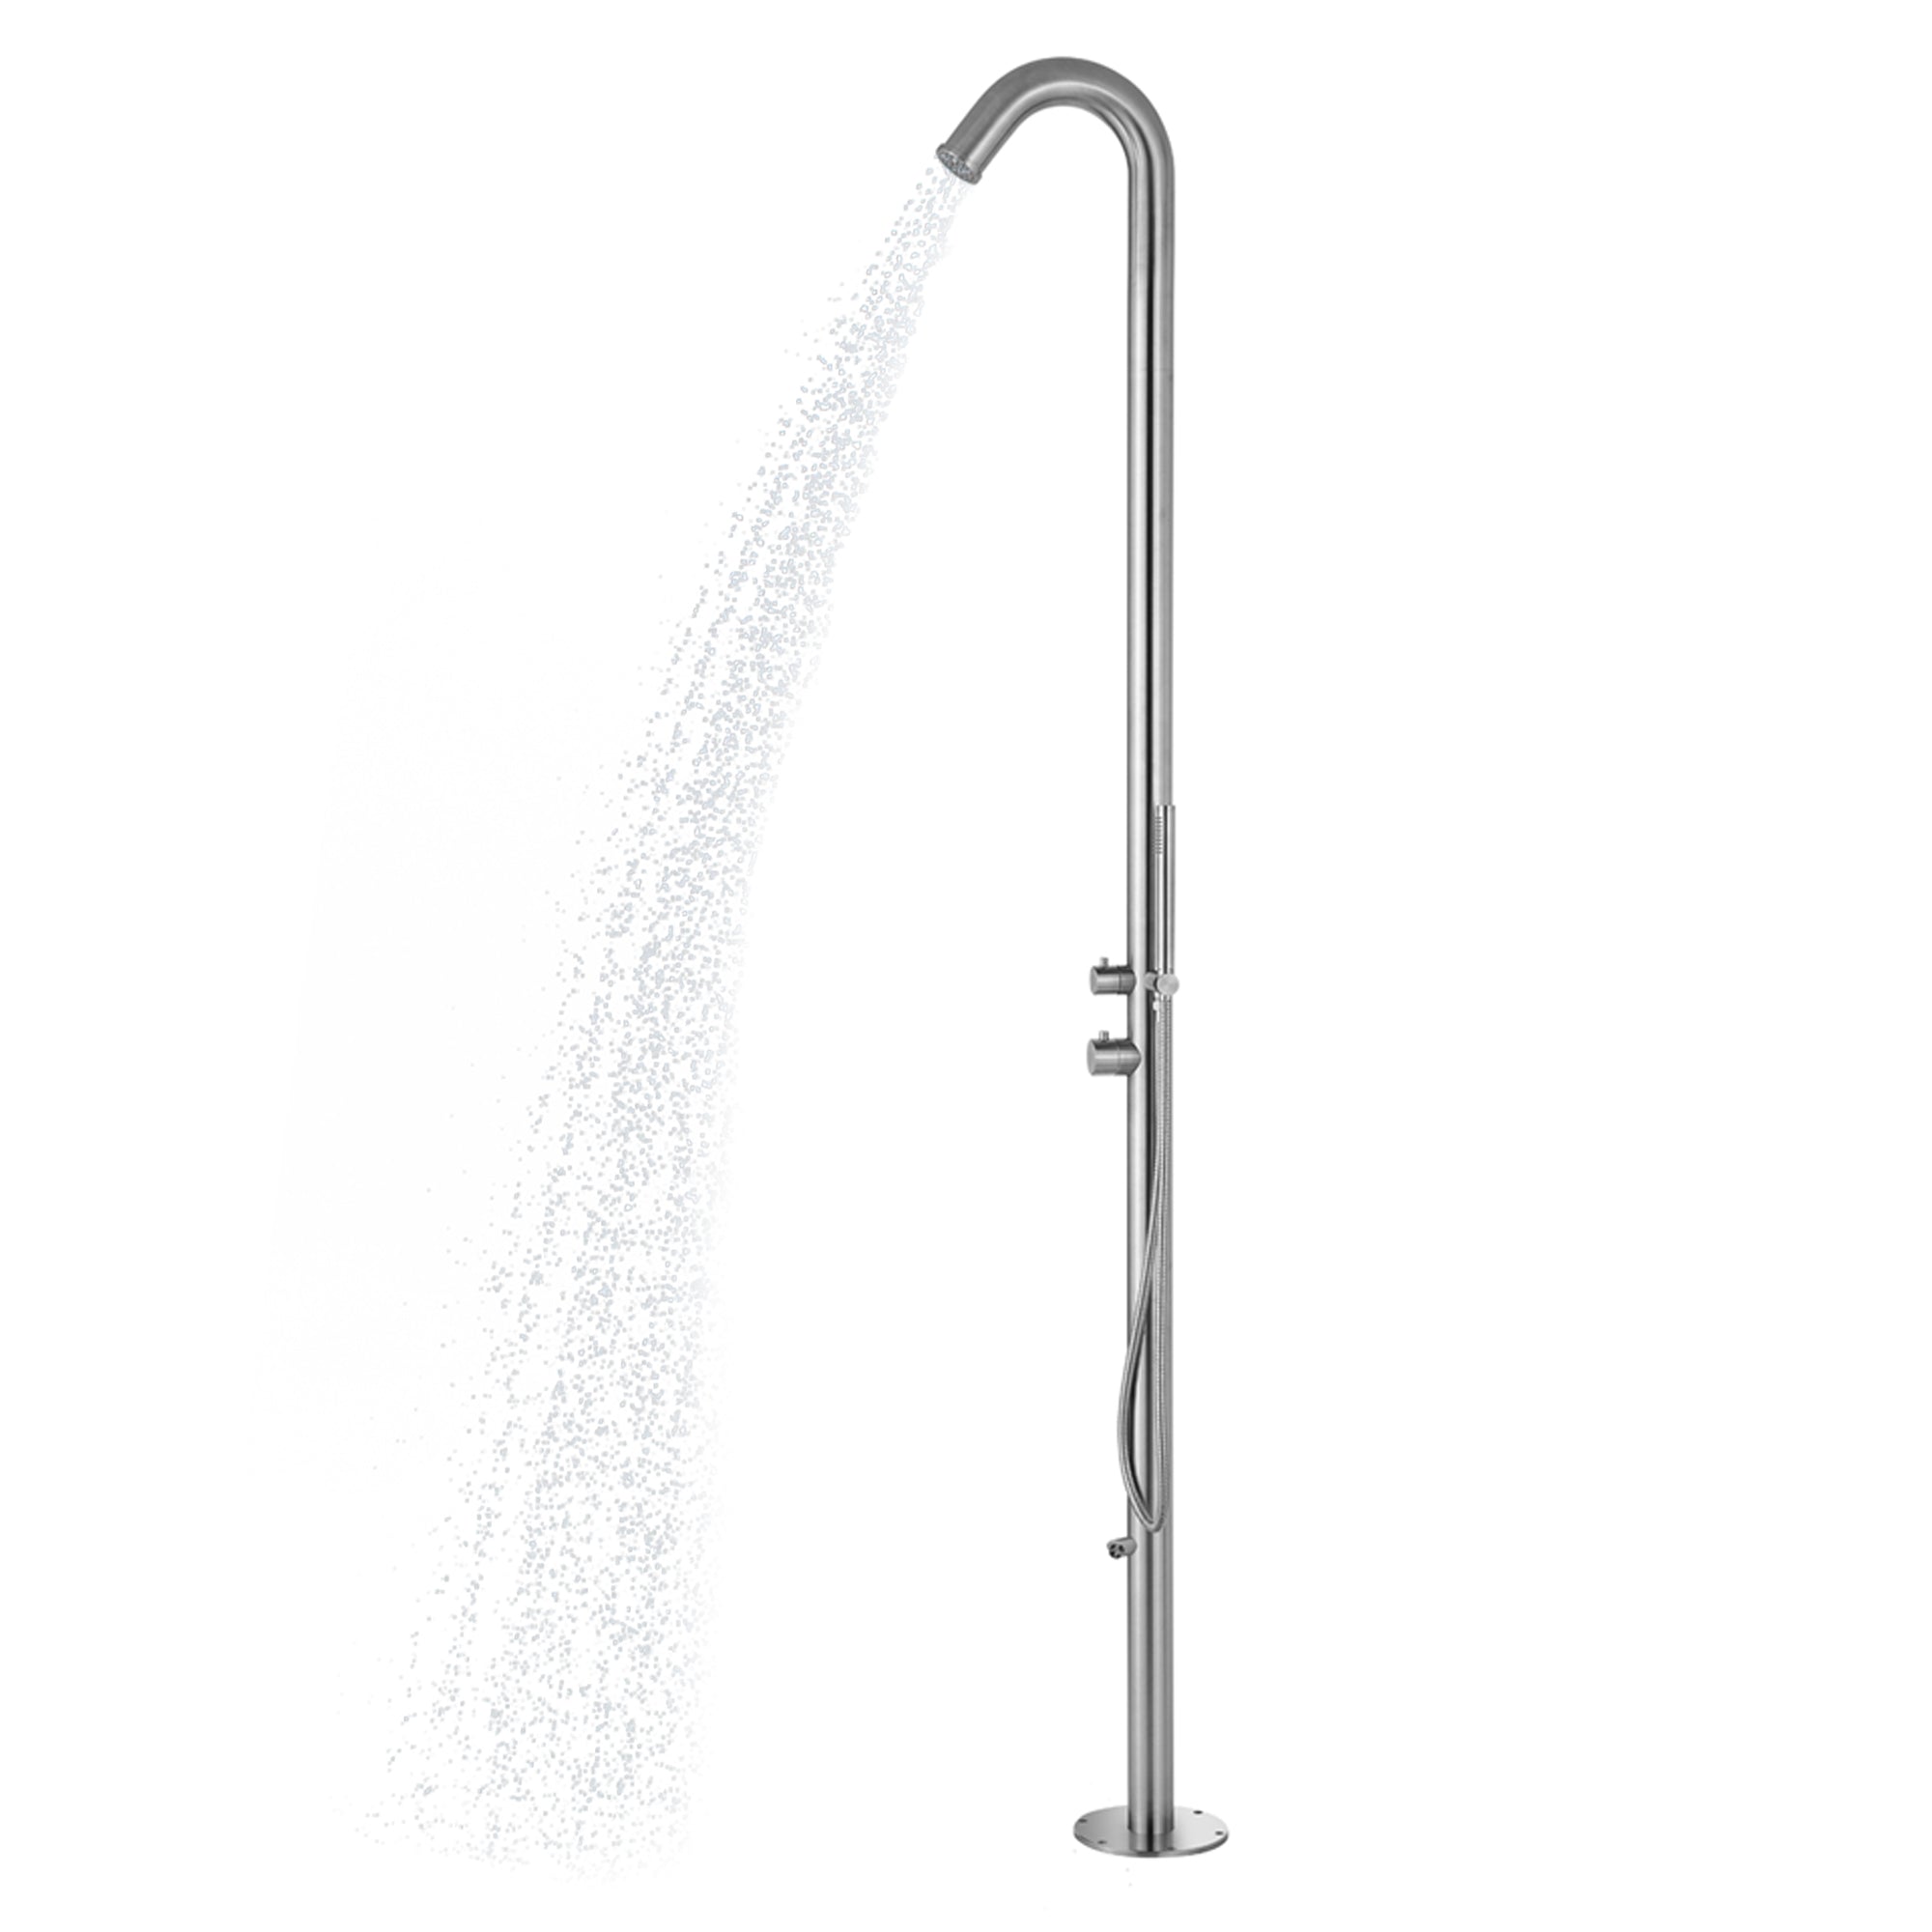 PULSE ShowerSpas Brushed Stainless Steel Outdoor Shower System - Wave Outdoor Shower - Includes an outdoor showerhead, hand shower, foot rinse spout, freestanding base and a built-in pressure balance valve - 1055-SSB - Vital Hydrotherapy